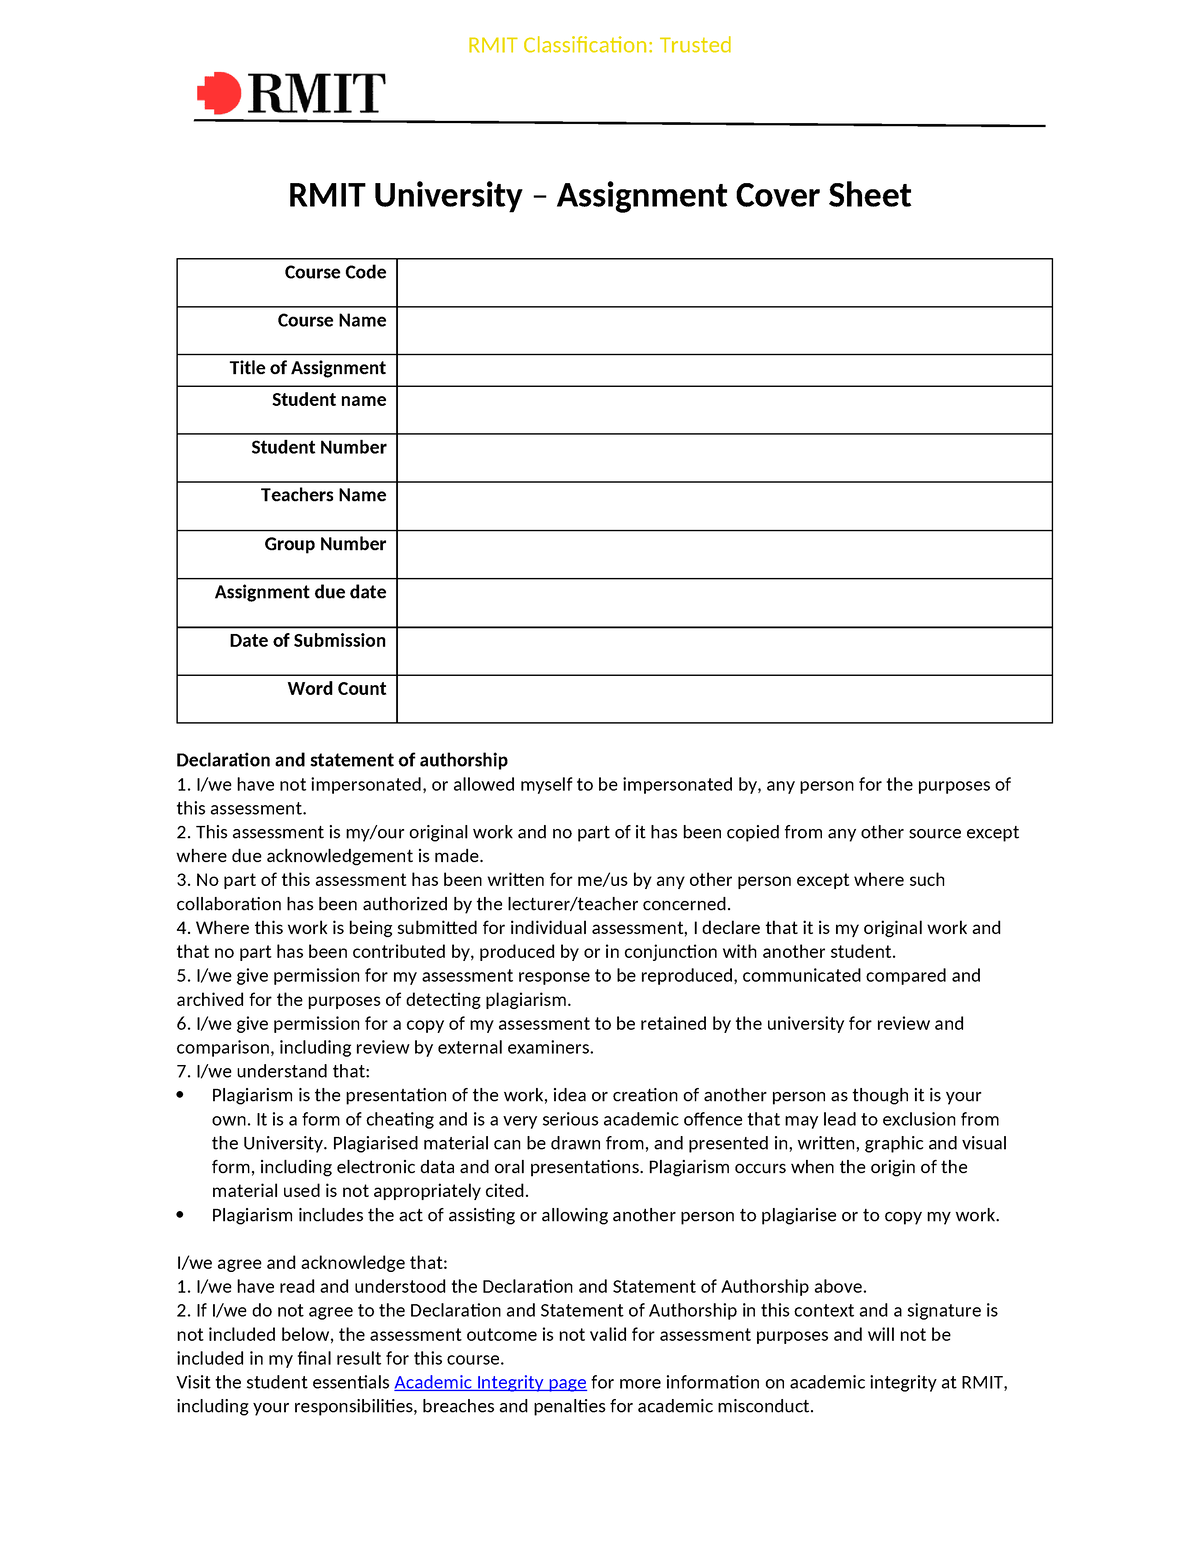 rmit assignment cover sheet 2022